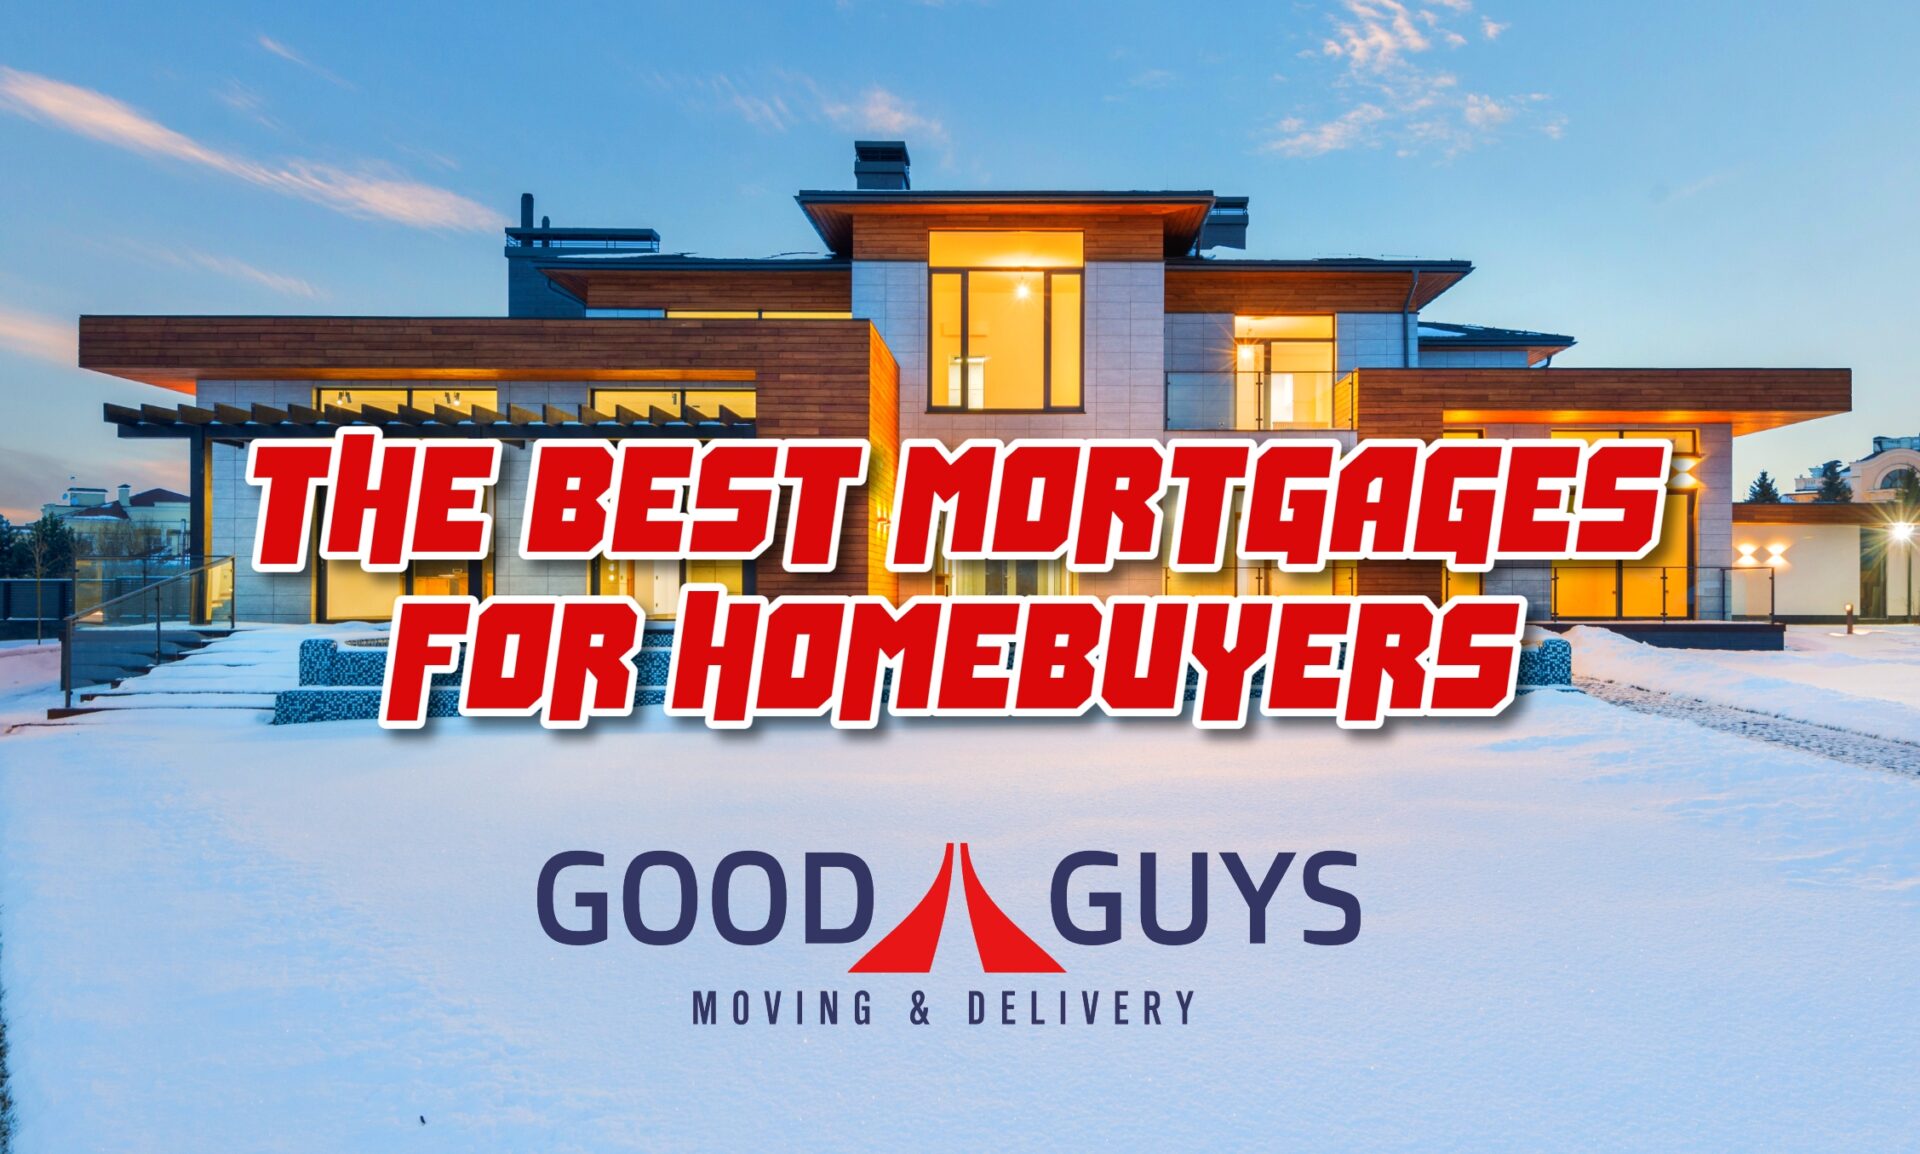 How To Avoid Moving Scams 1 The 5 Best Mortgages For Homebuyers